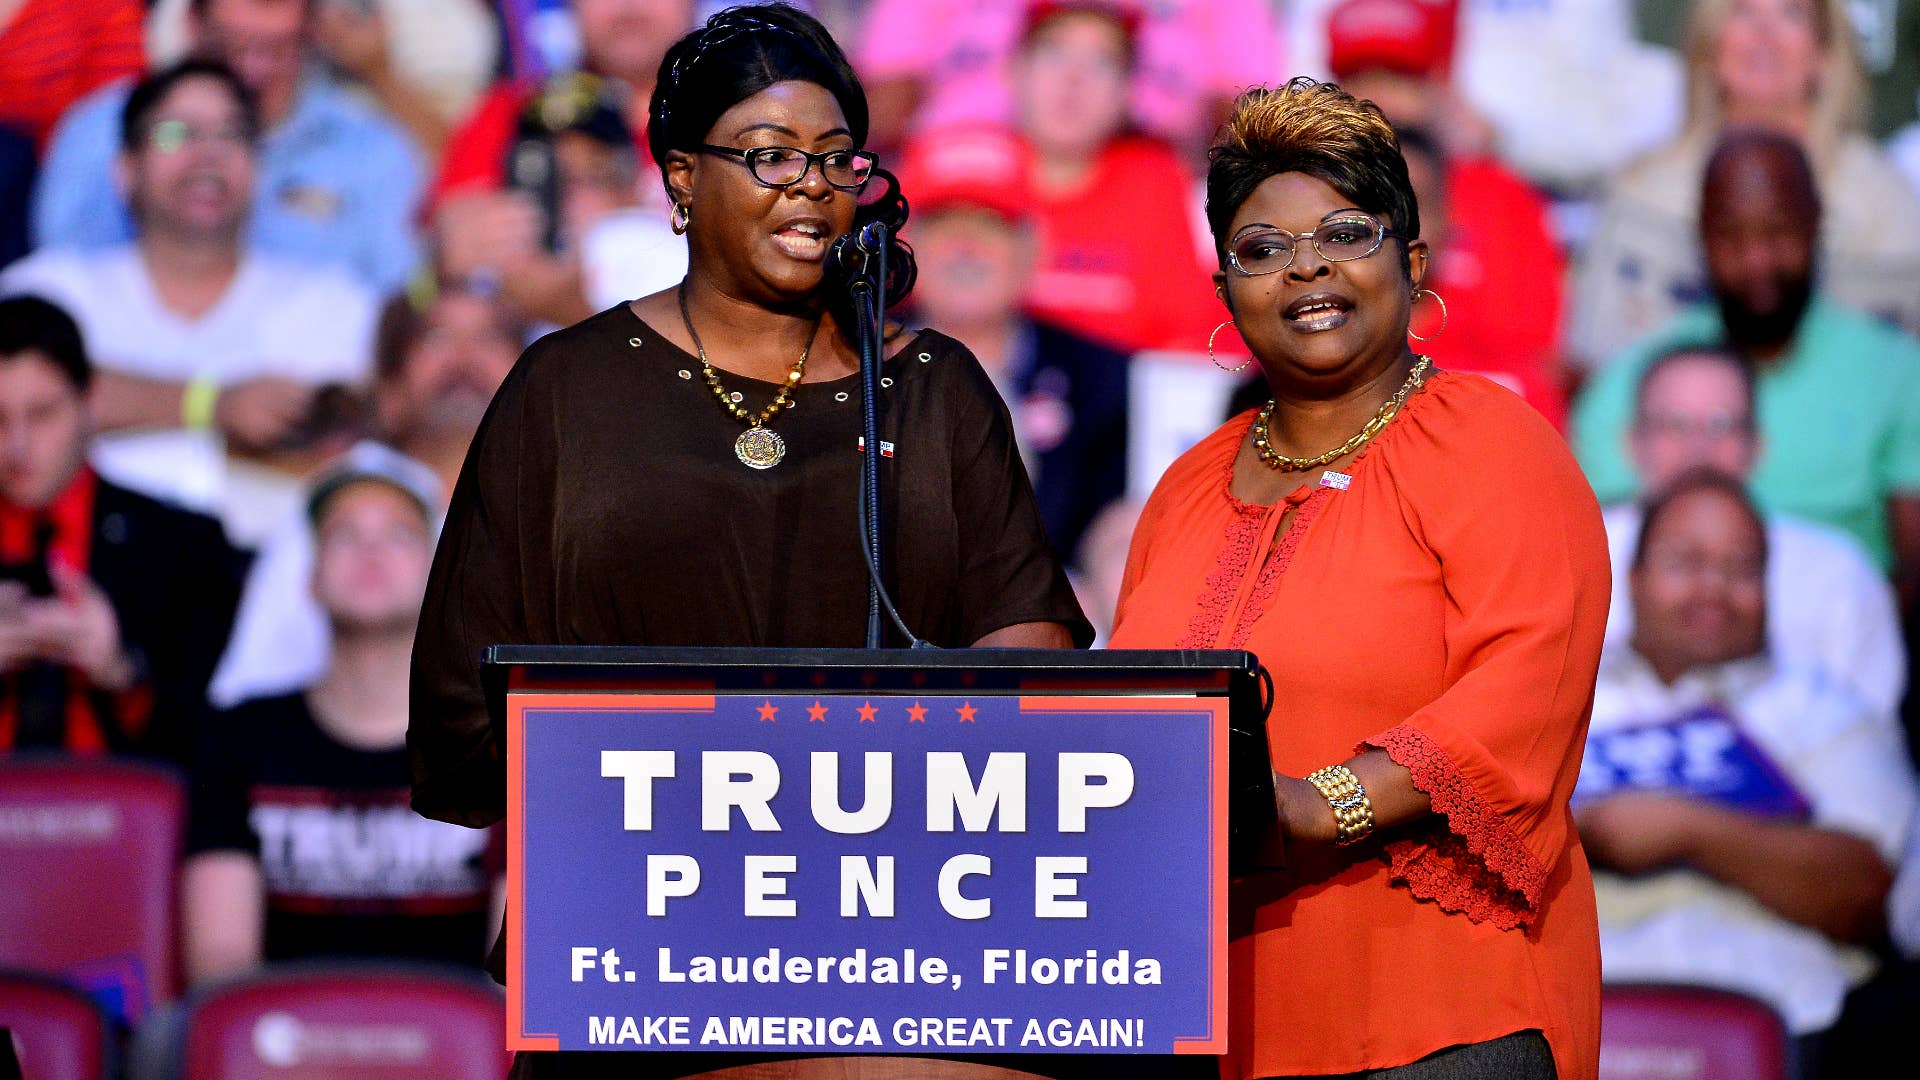 Diamond and Silk at a Trump rally in Florida